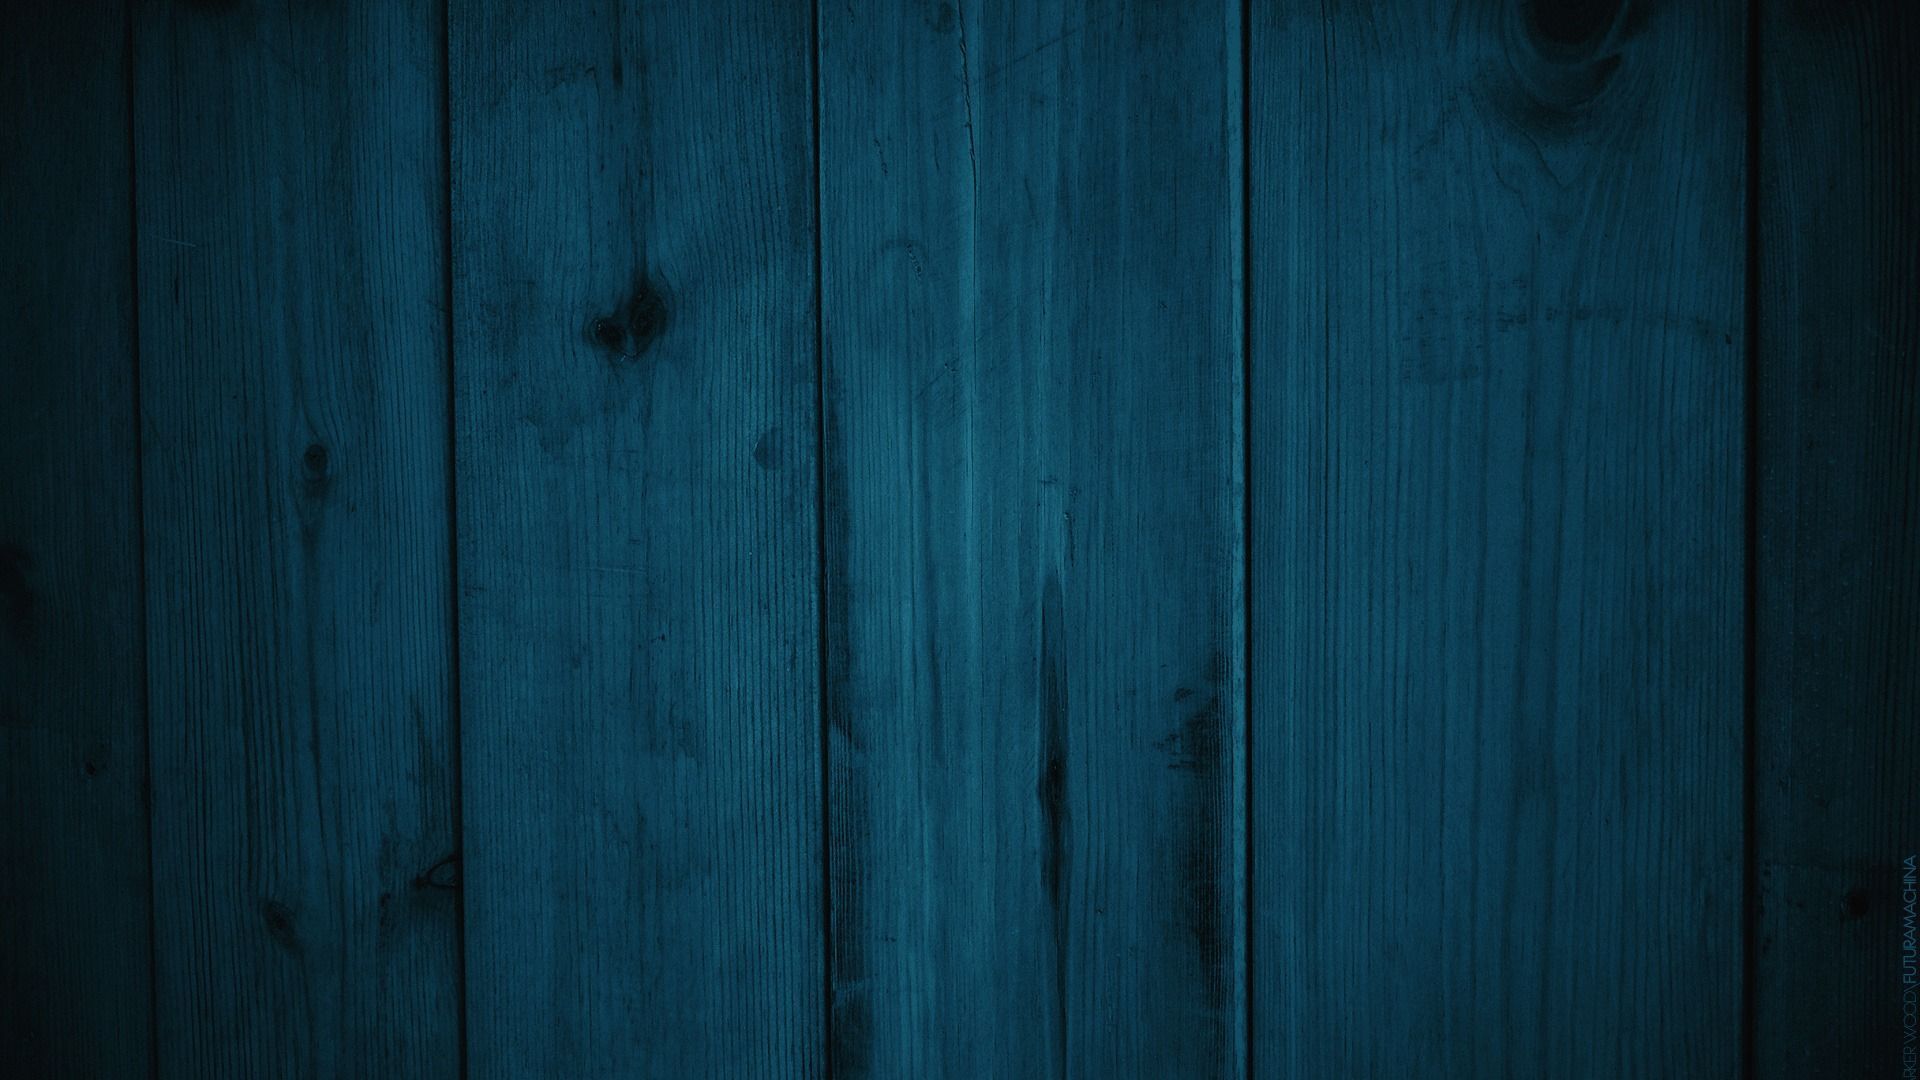 Blue and green wood 1920 x 1080 Wallpaper